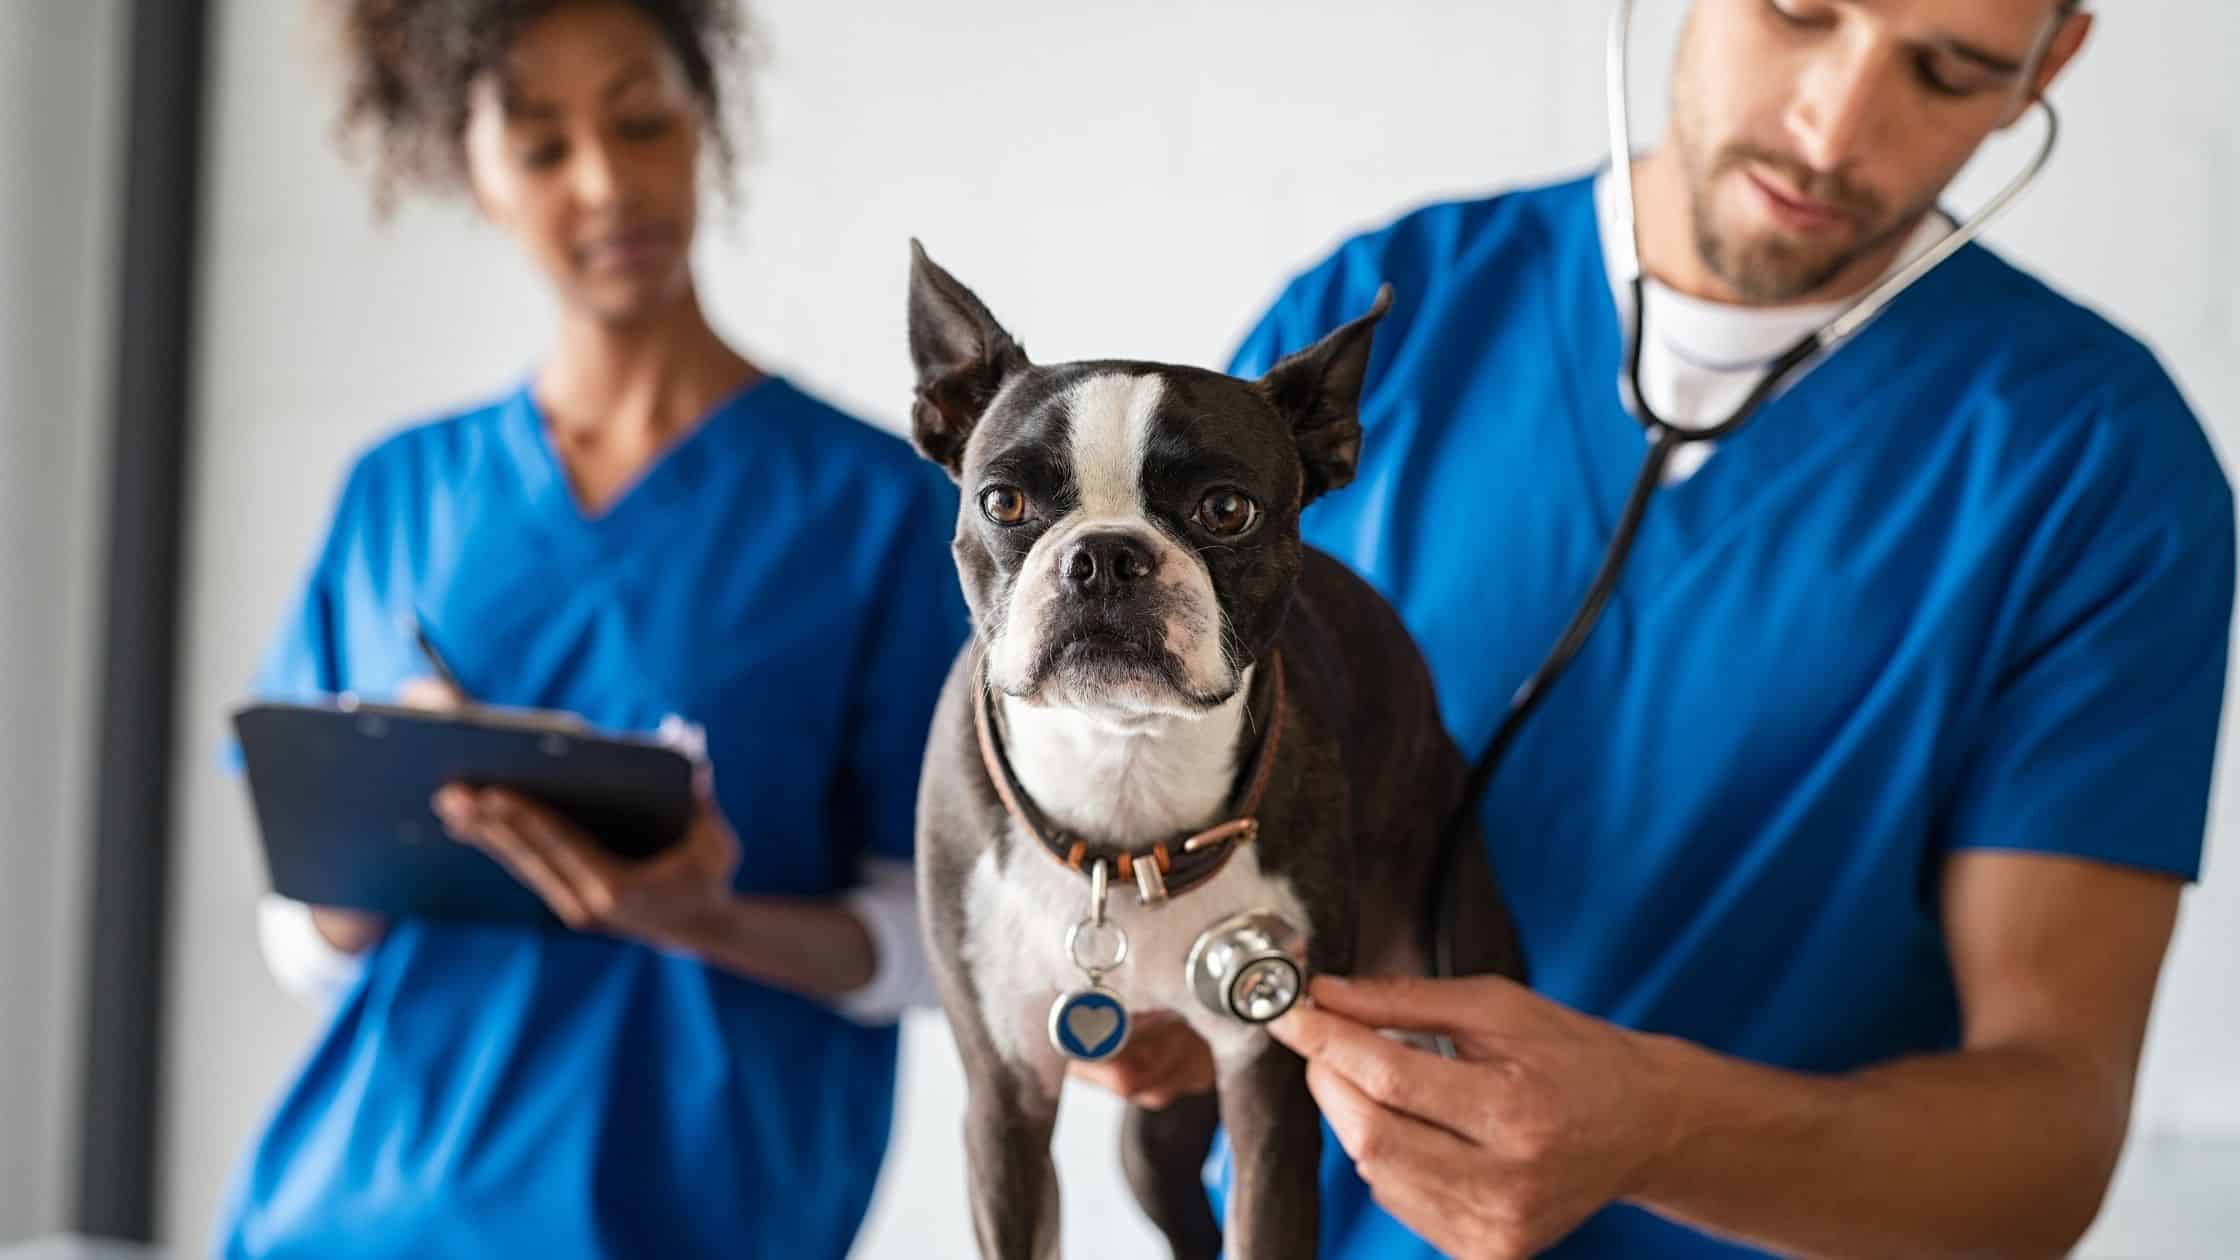 Questions you should ask on your vet visit regarding dogs